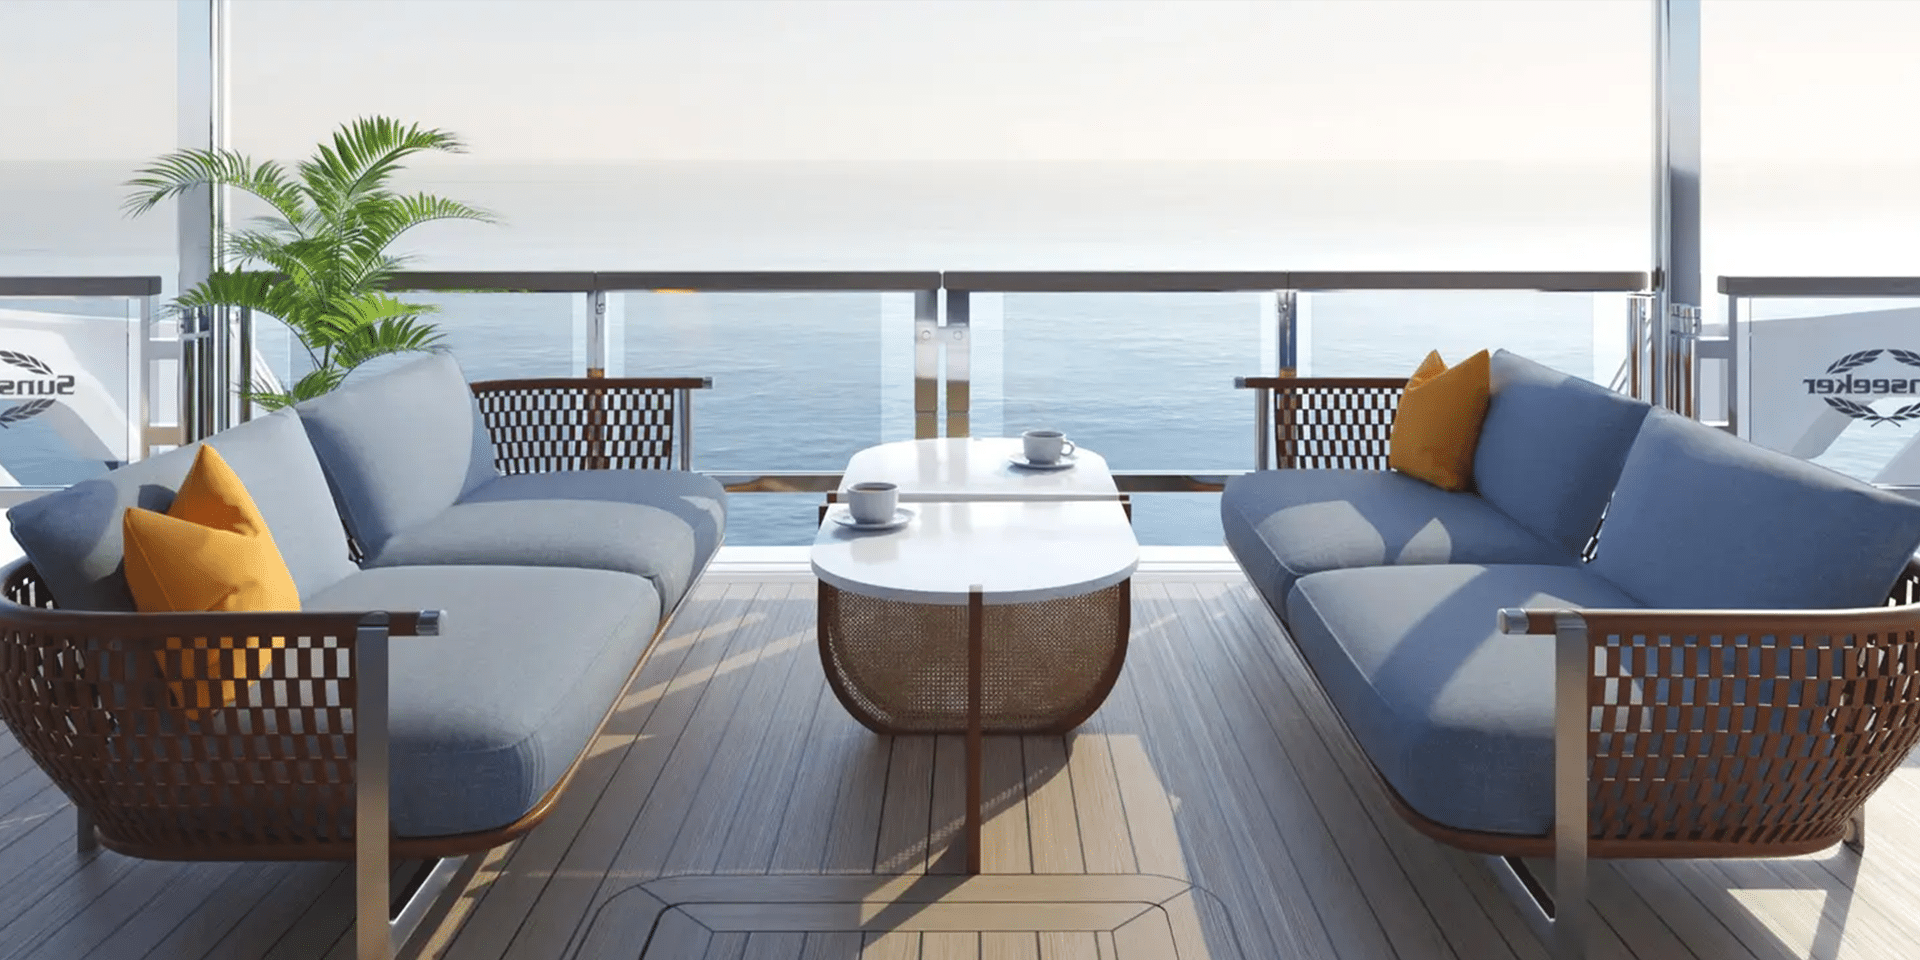 Sunseeker and Italian design agency, Visionnaire, are making waves